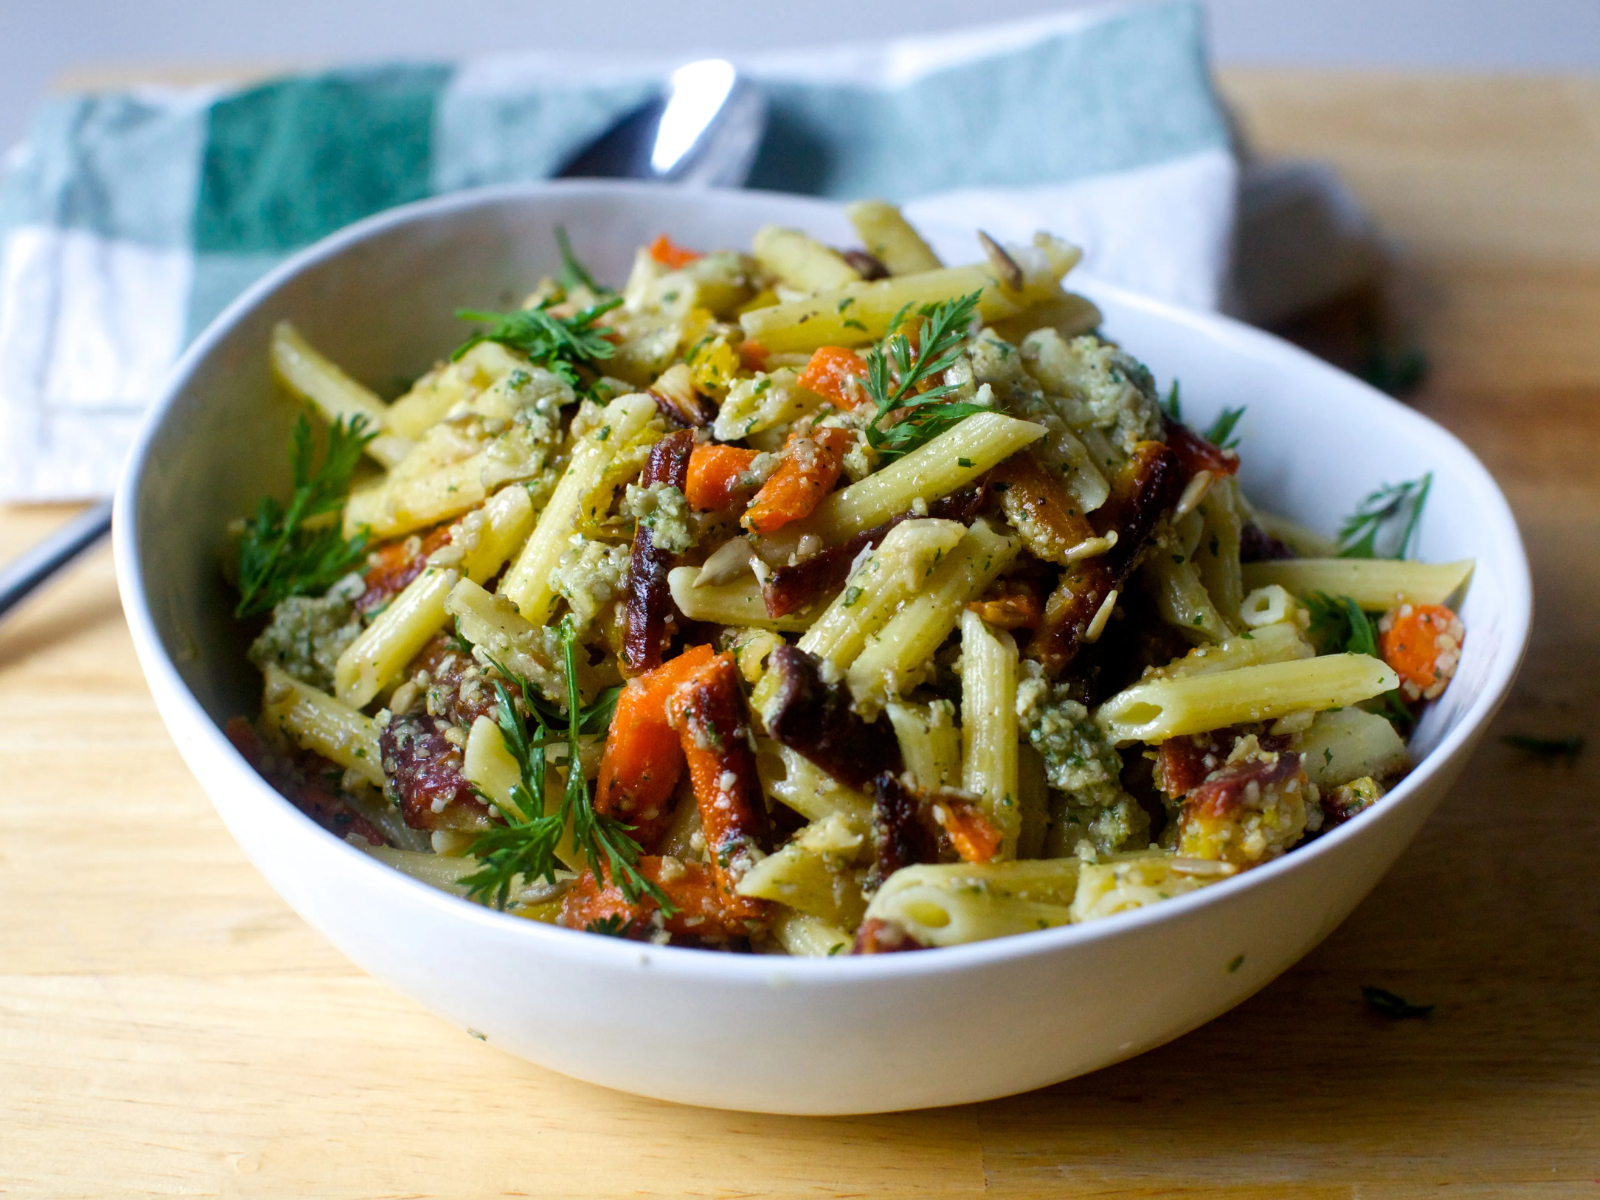 Pasta Salad with Roasted Carrots and Sunflower Seed Dressing